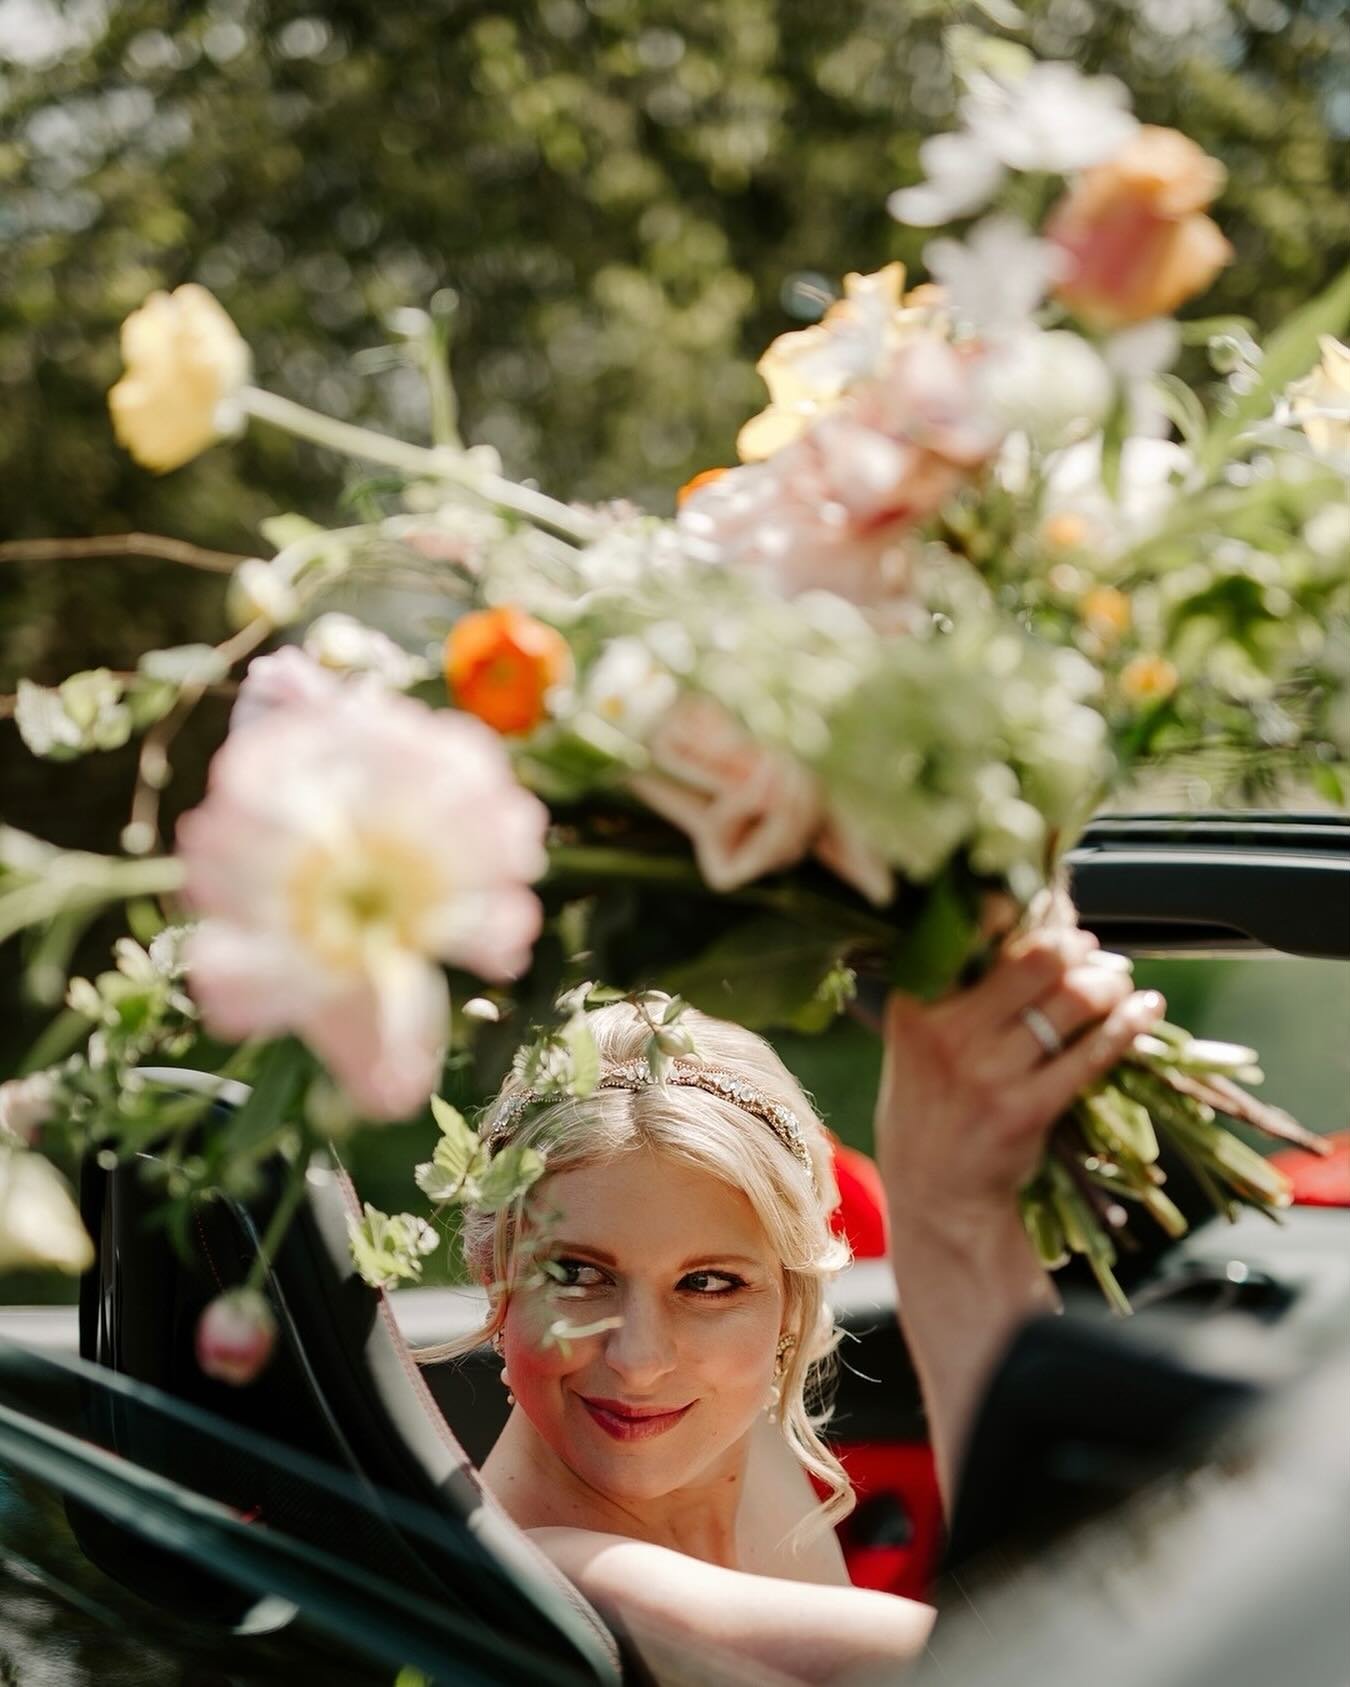 We love the idea of hanging onto your bridal bouquet and then holding it aloft in triumphant salute as you leave the reception in your wedding car! 🚘 💐
Photography @sarahgracephotography1
Venue @hinton_st.mary_estate
Car @pureweddingentertainment
C